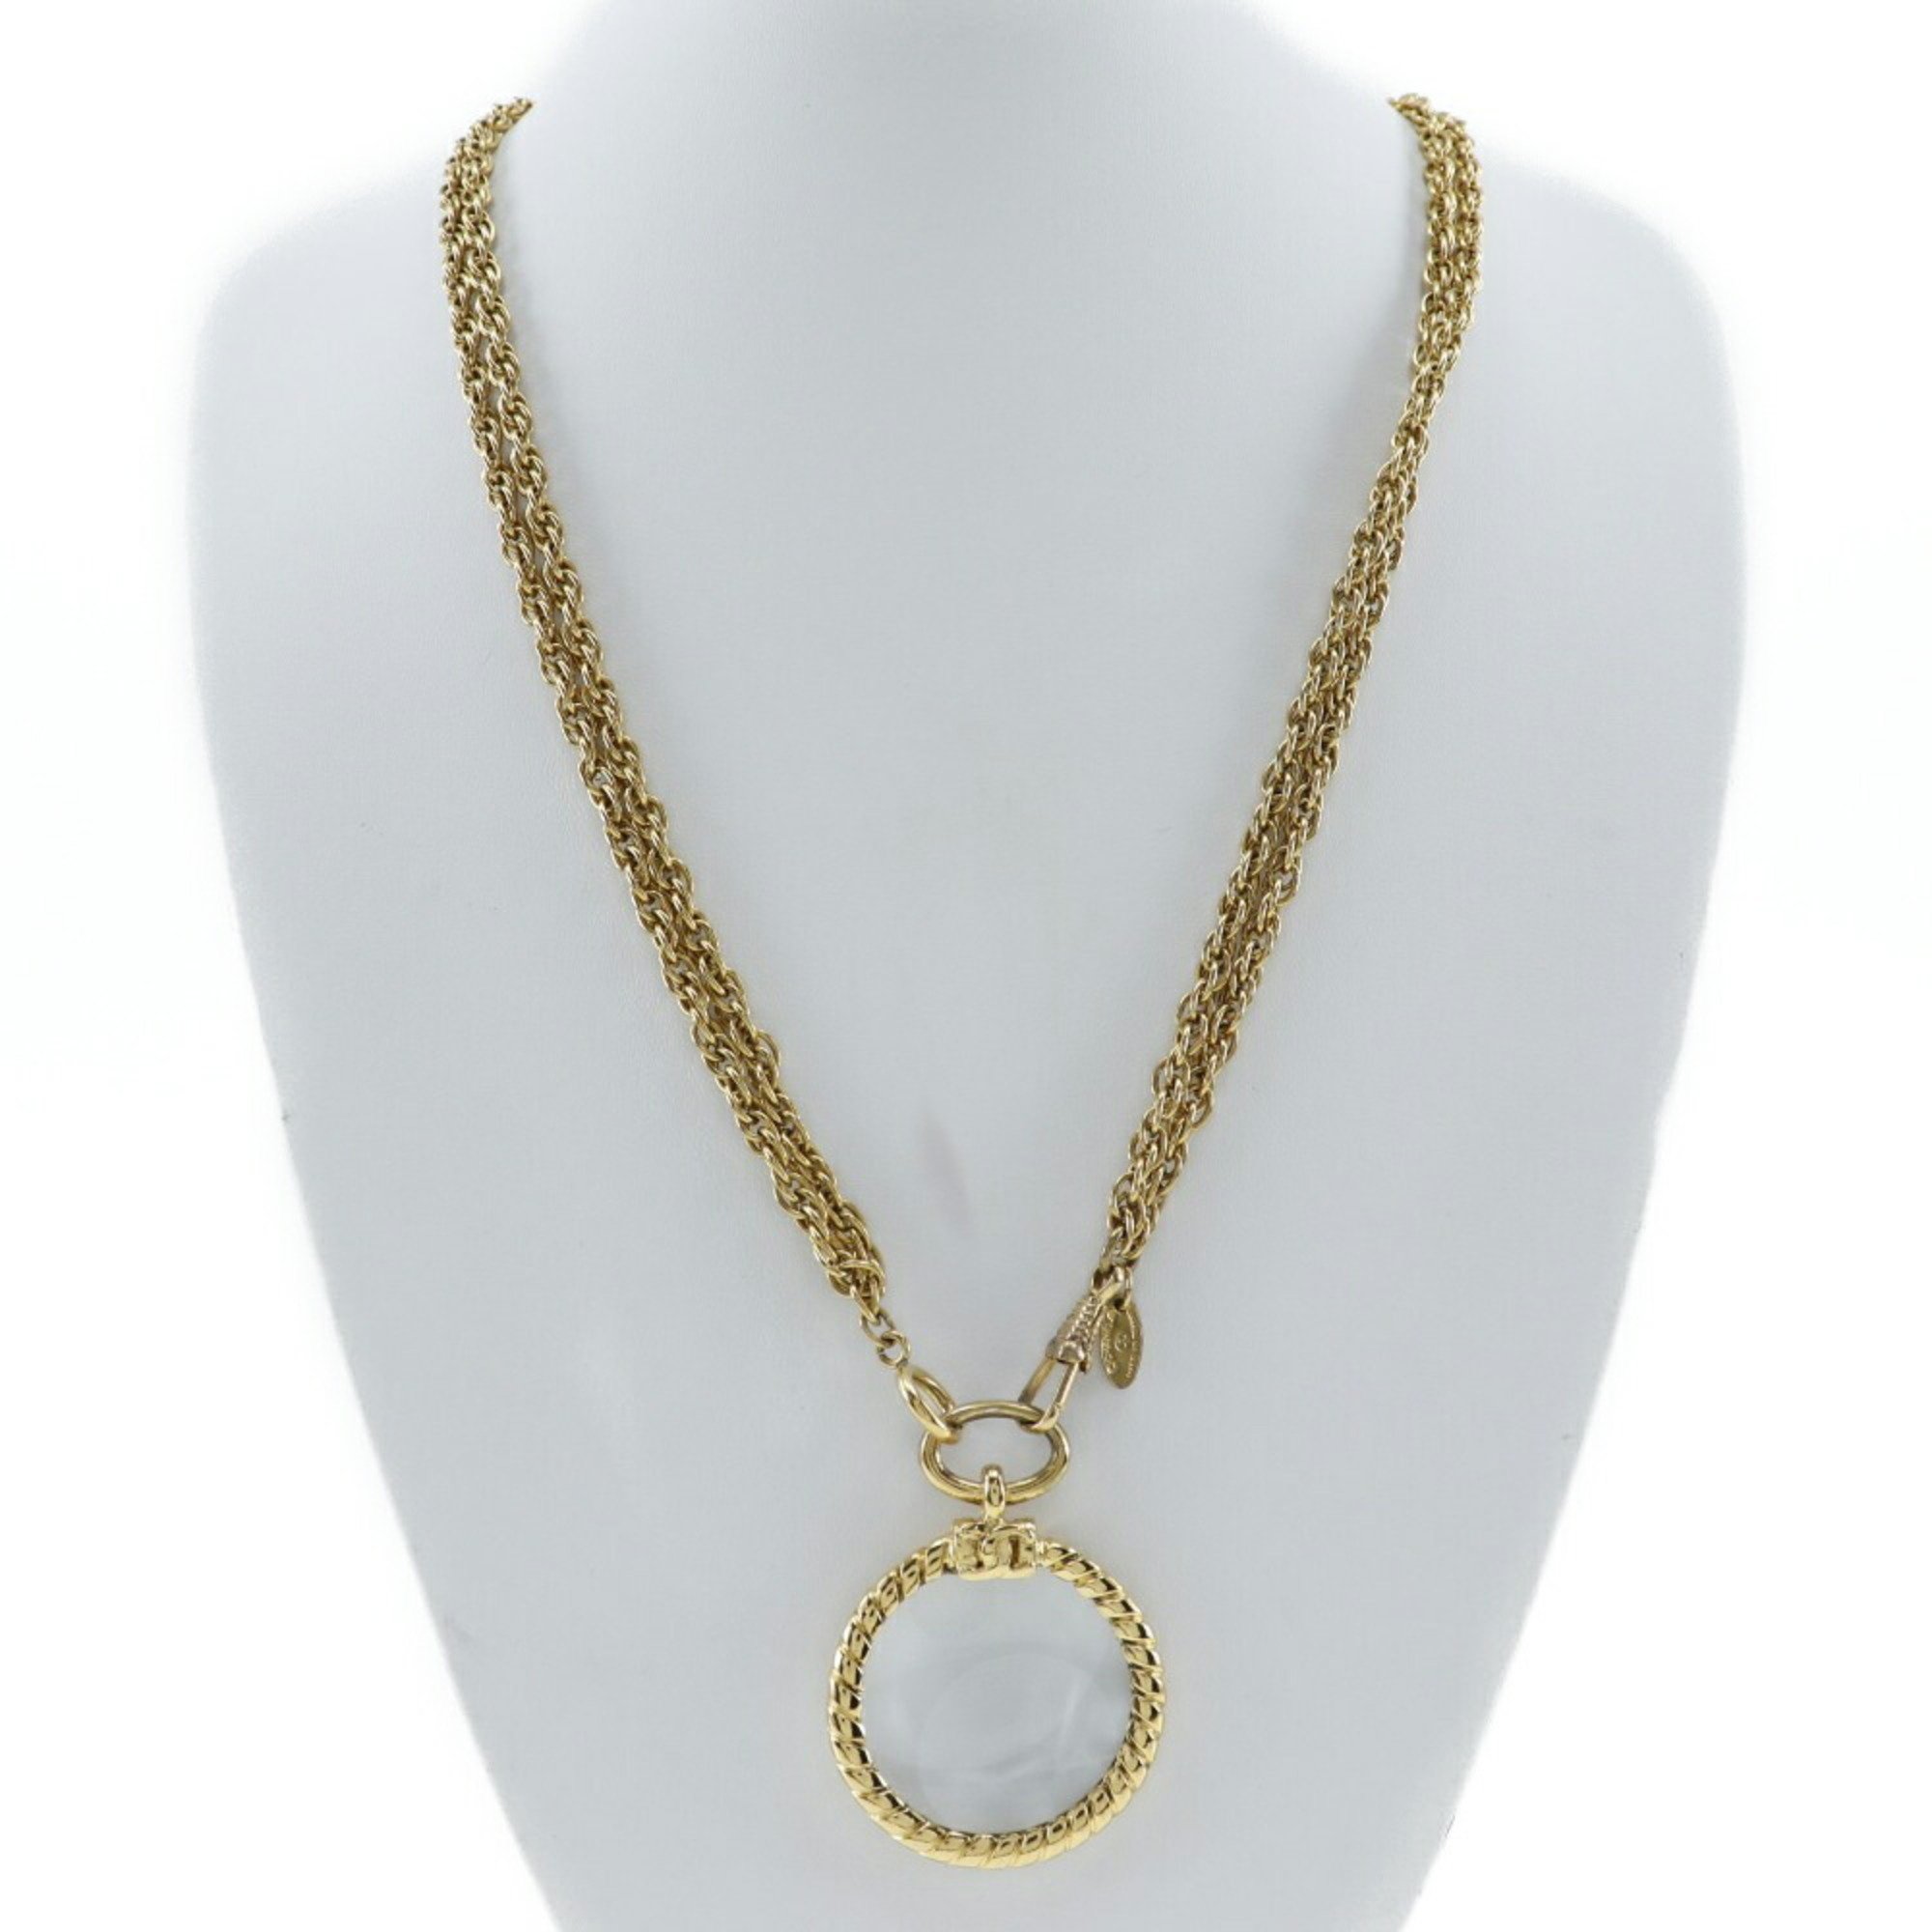 CHANEL Loupe Necklace Double Chain Vintage Gold Plated Made in France Ladies